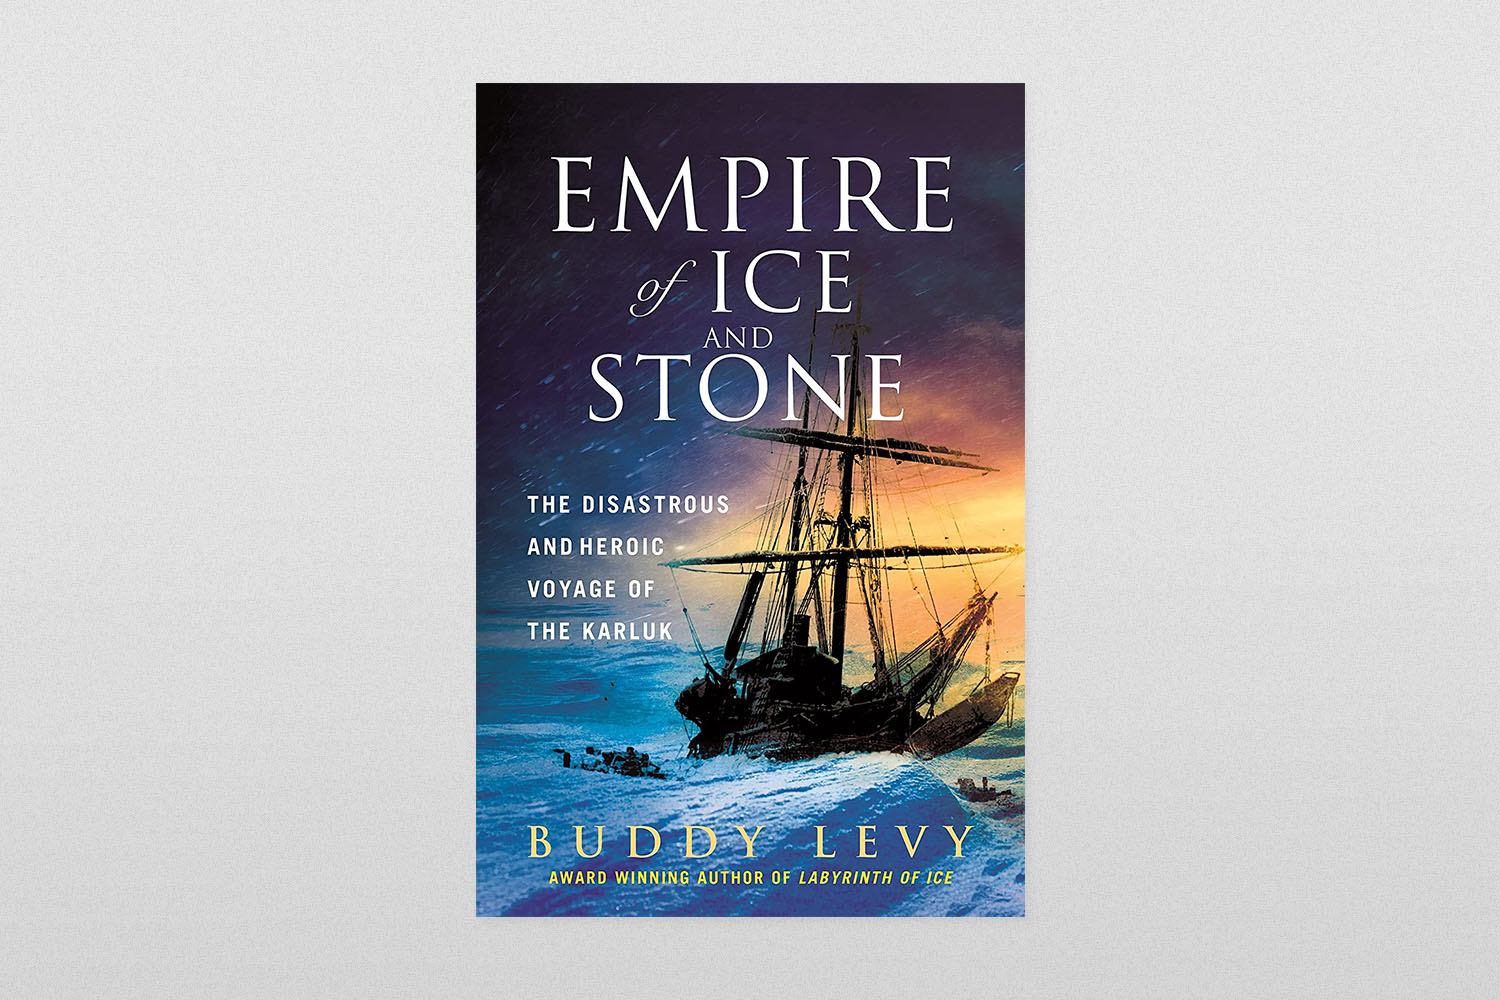 Empire of Ice and Stone by Buddy Levy